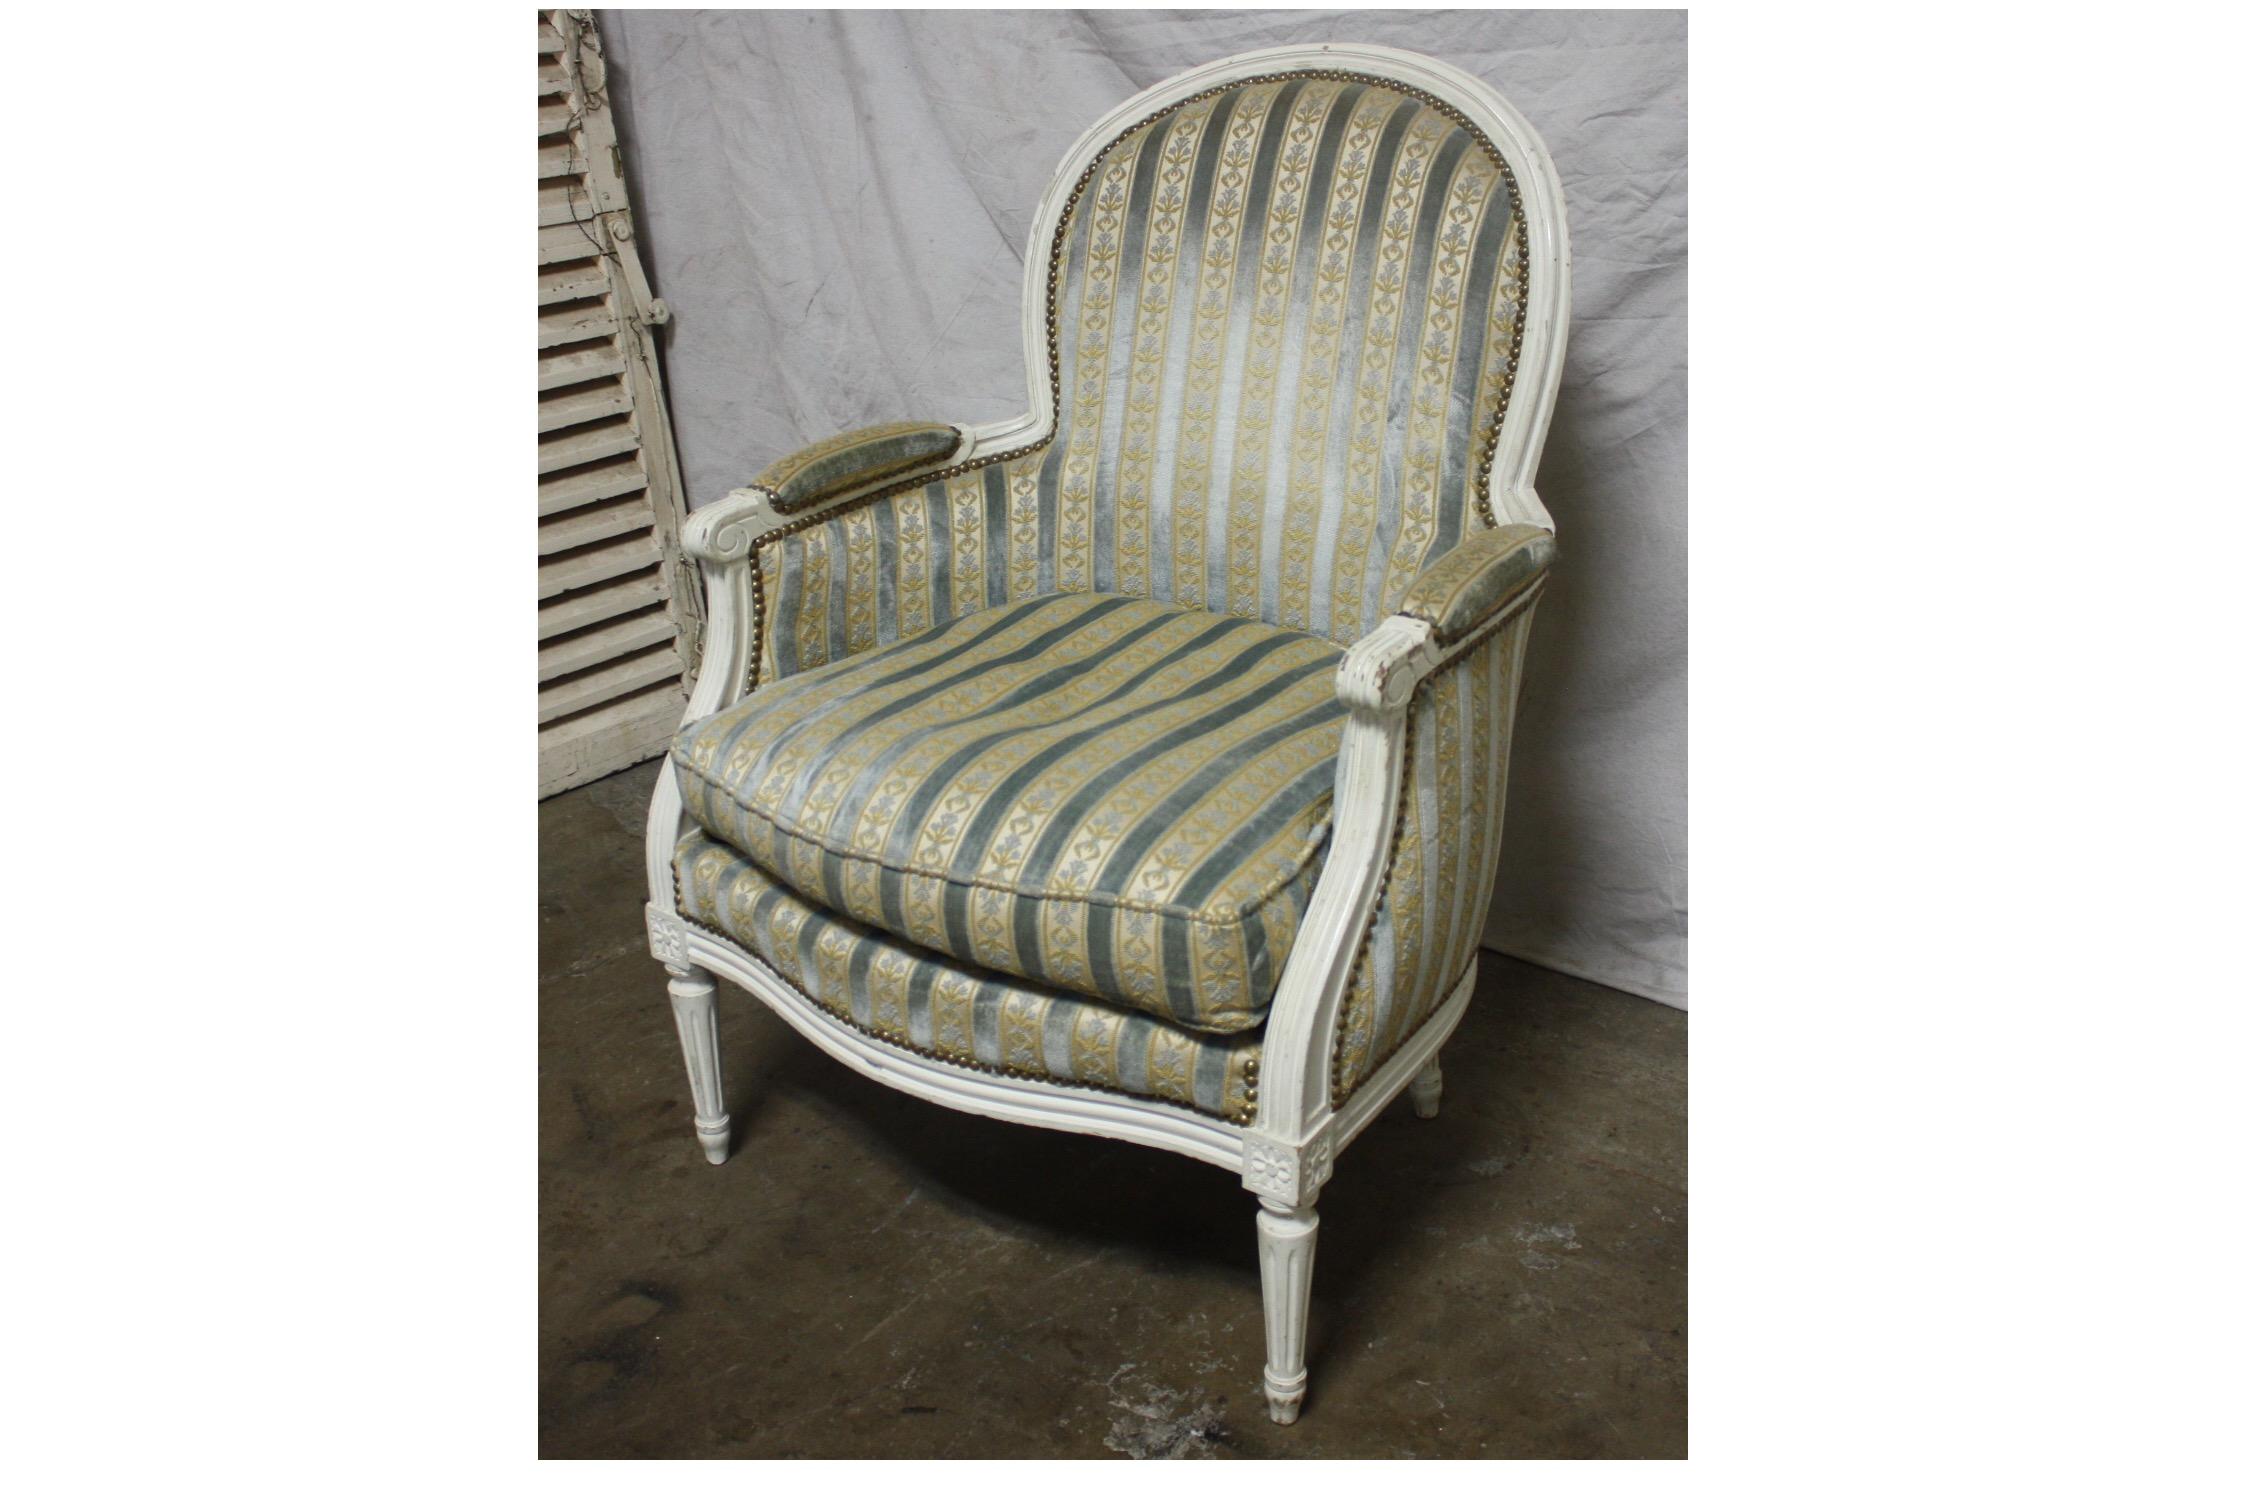 Early 20th century French bergère chair.